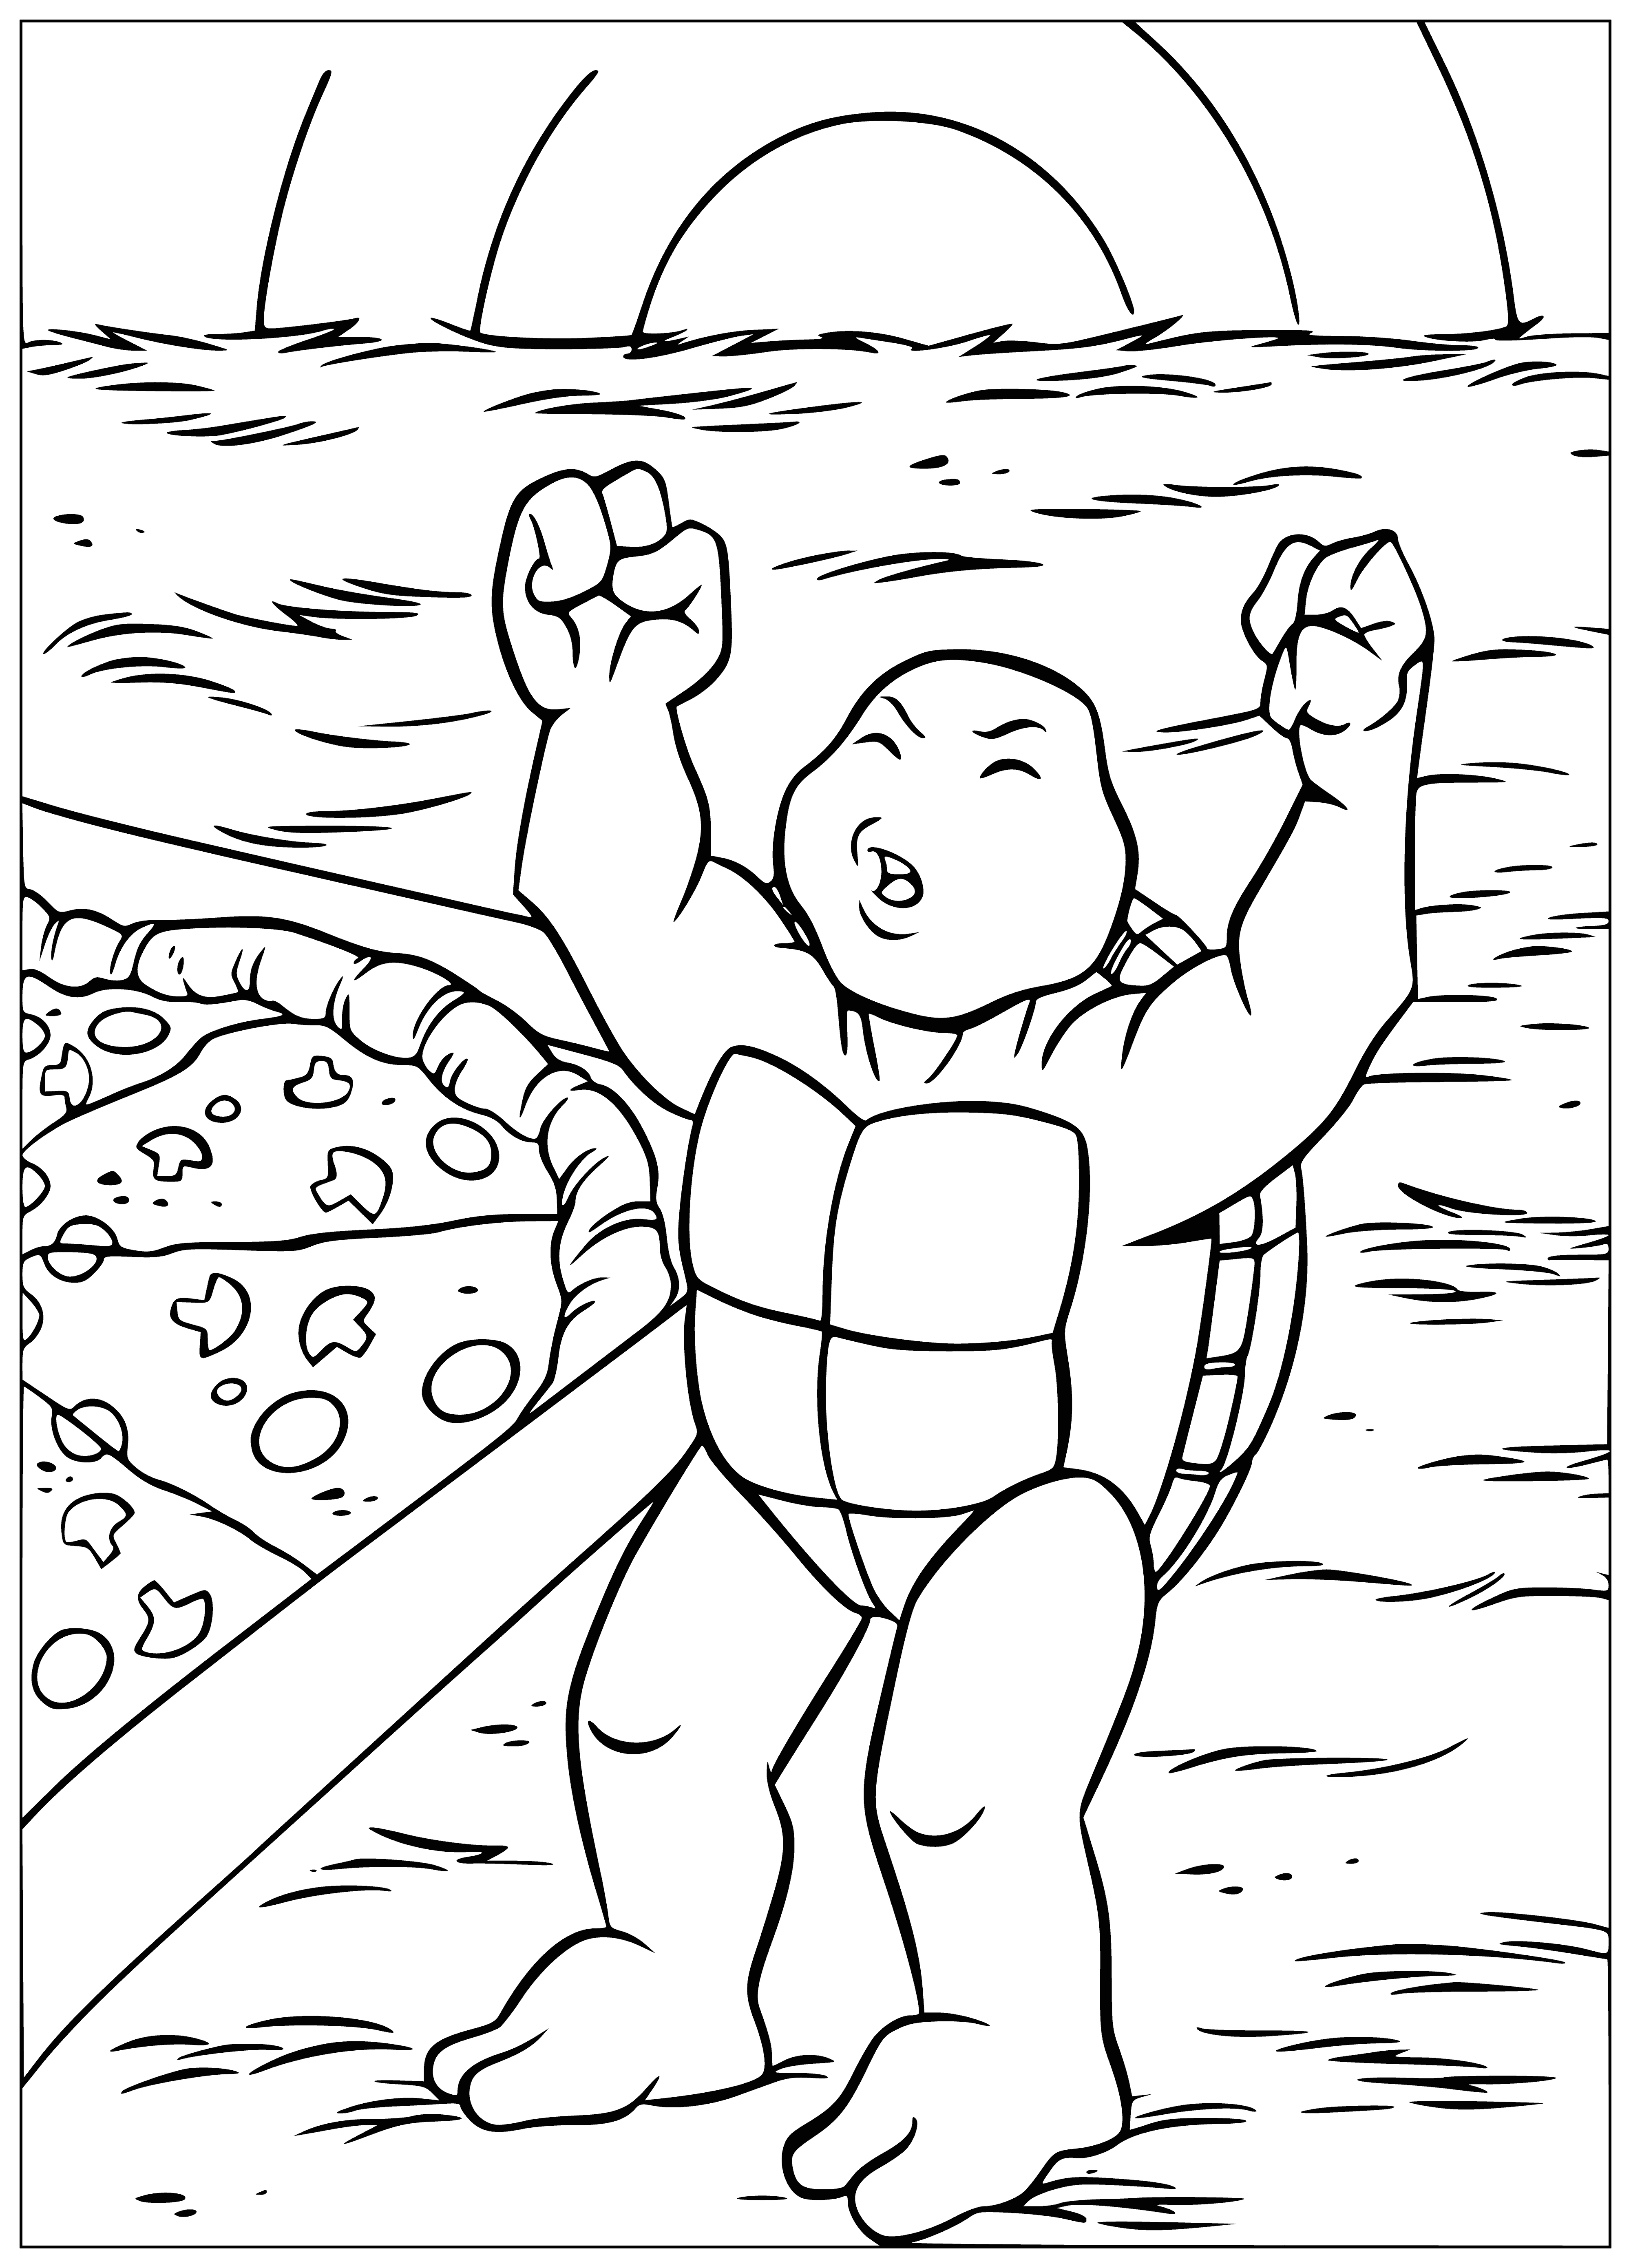 coloring page: Turtle holding pizza in hands in coloring page.